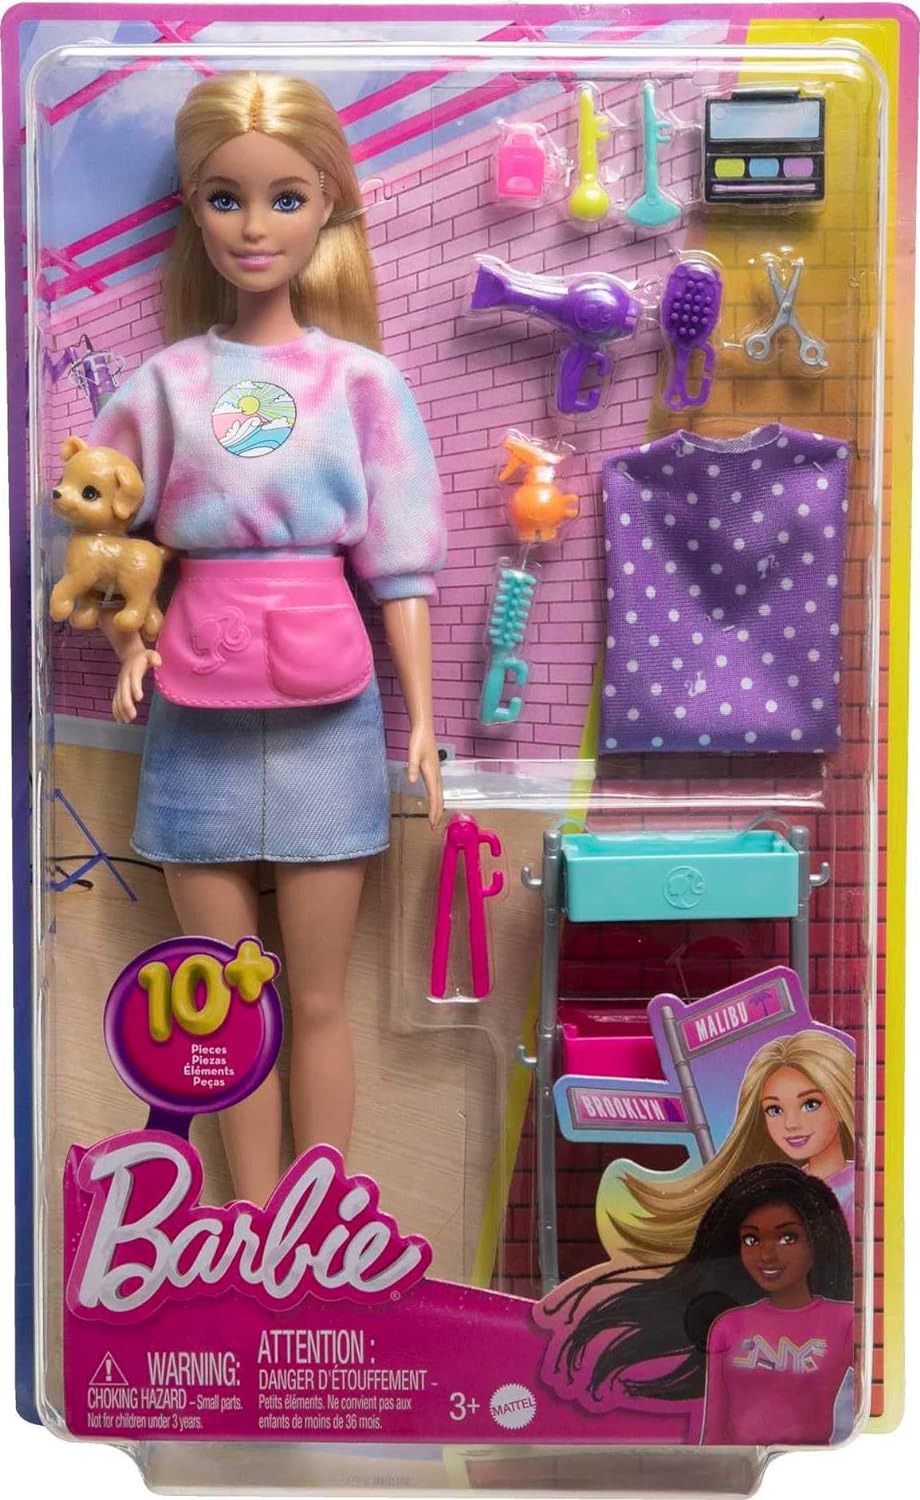 Barbie “Malibu” Stylist Doll & 14 Accessories Playset, Hair & Makeup Theme with Puppy & Styling Cart